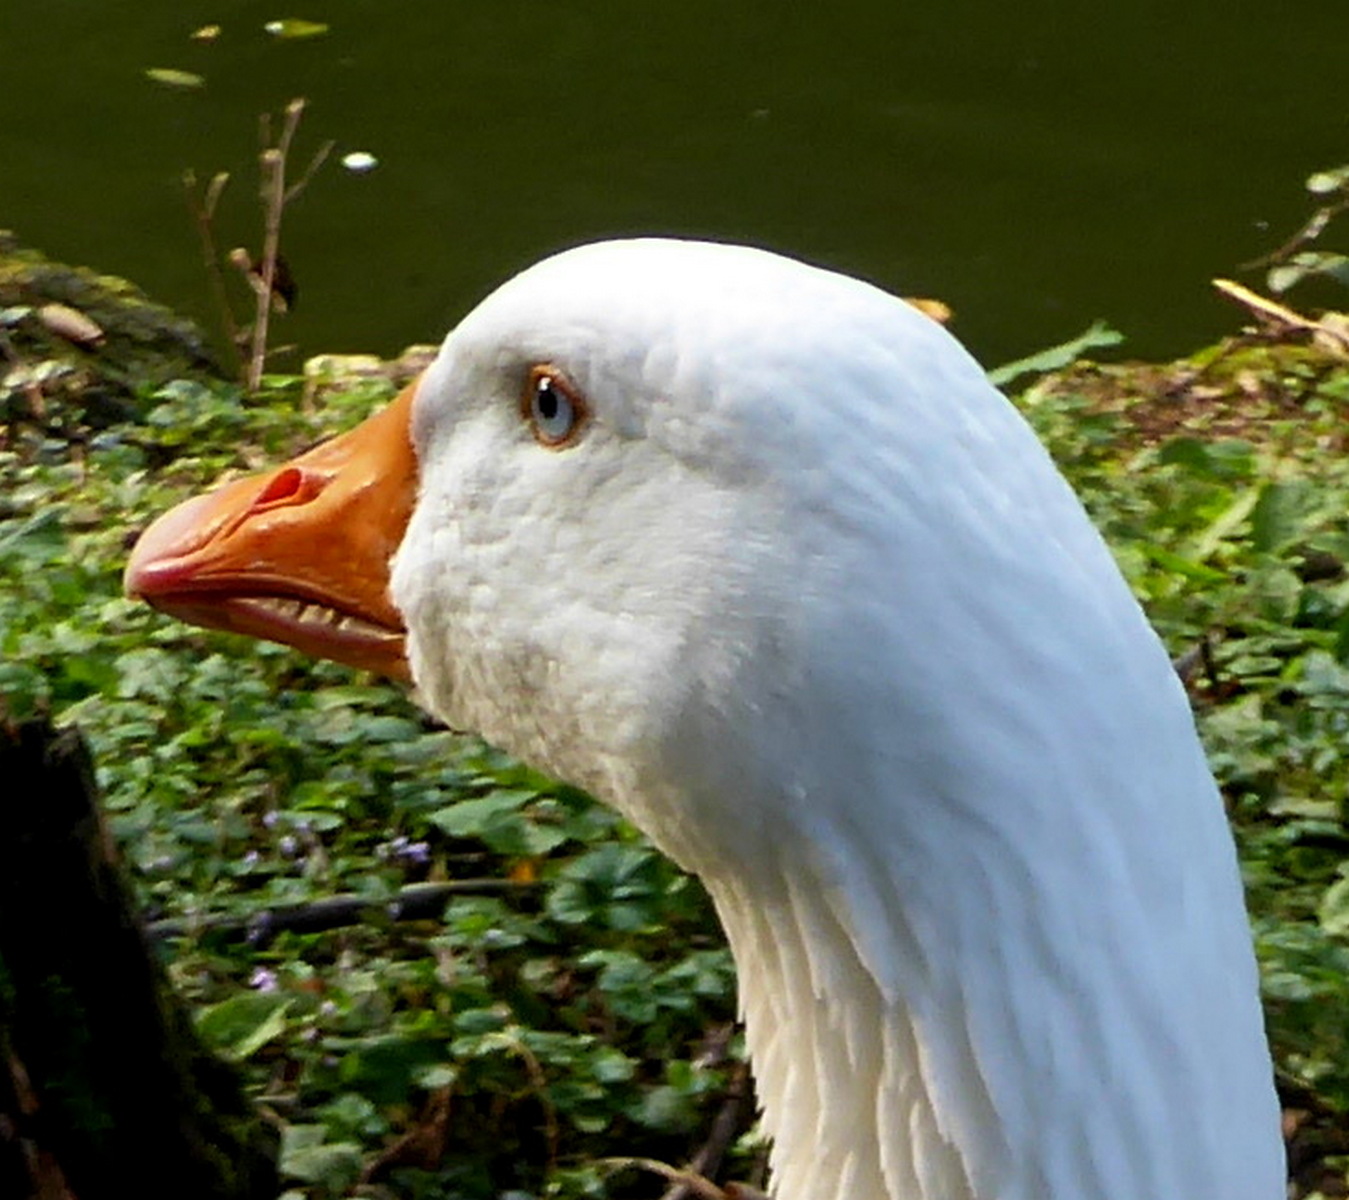 the so-called "goose look"...